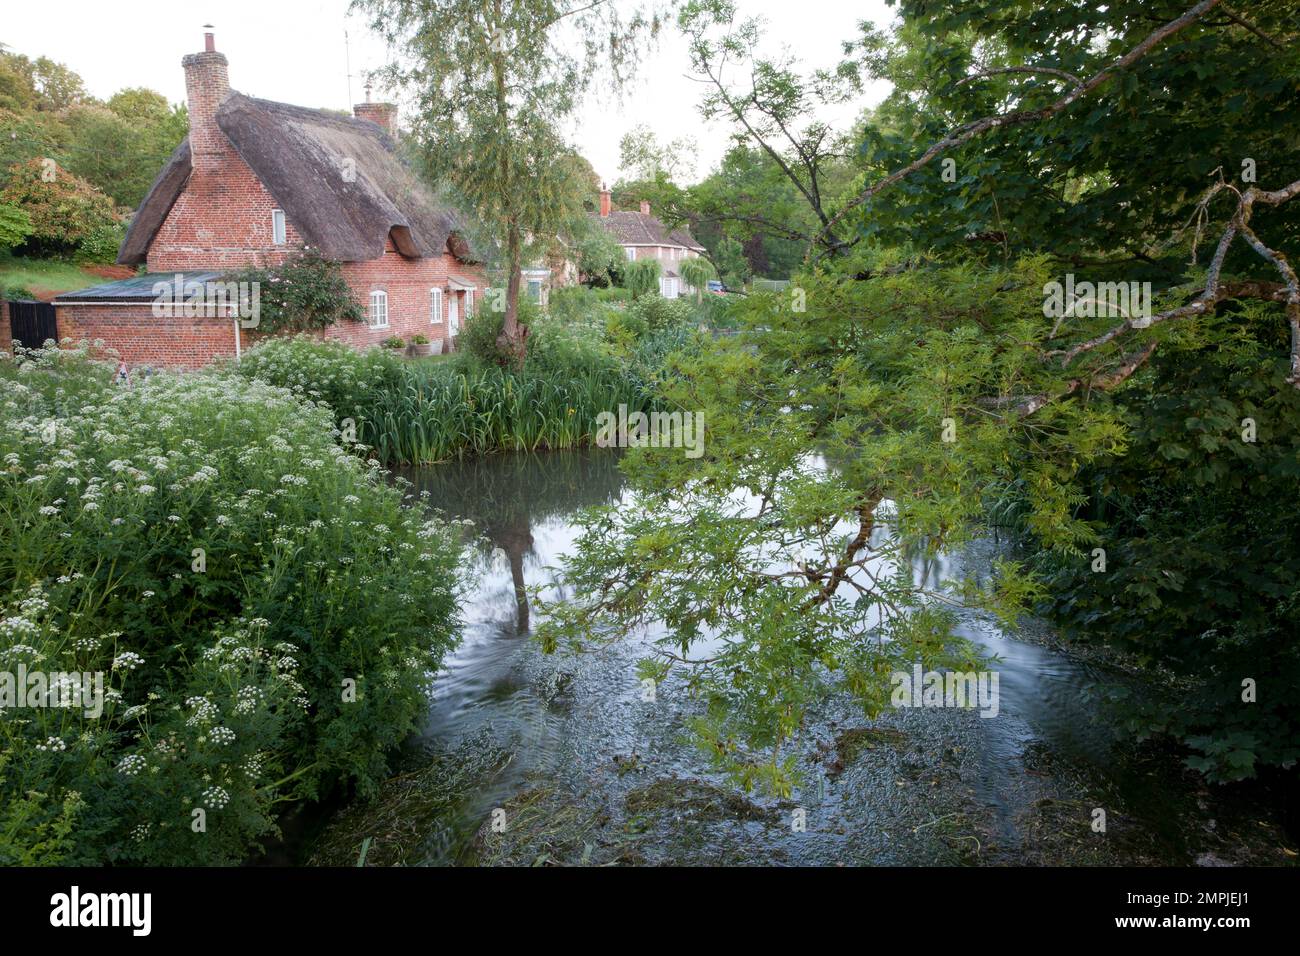 The River Ebble in the village of Stratford Tony in Wiltshire. Stock Photo